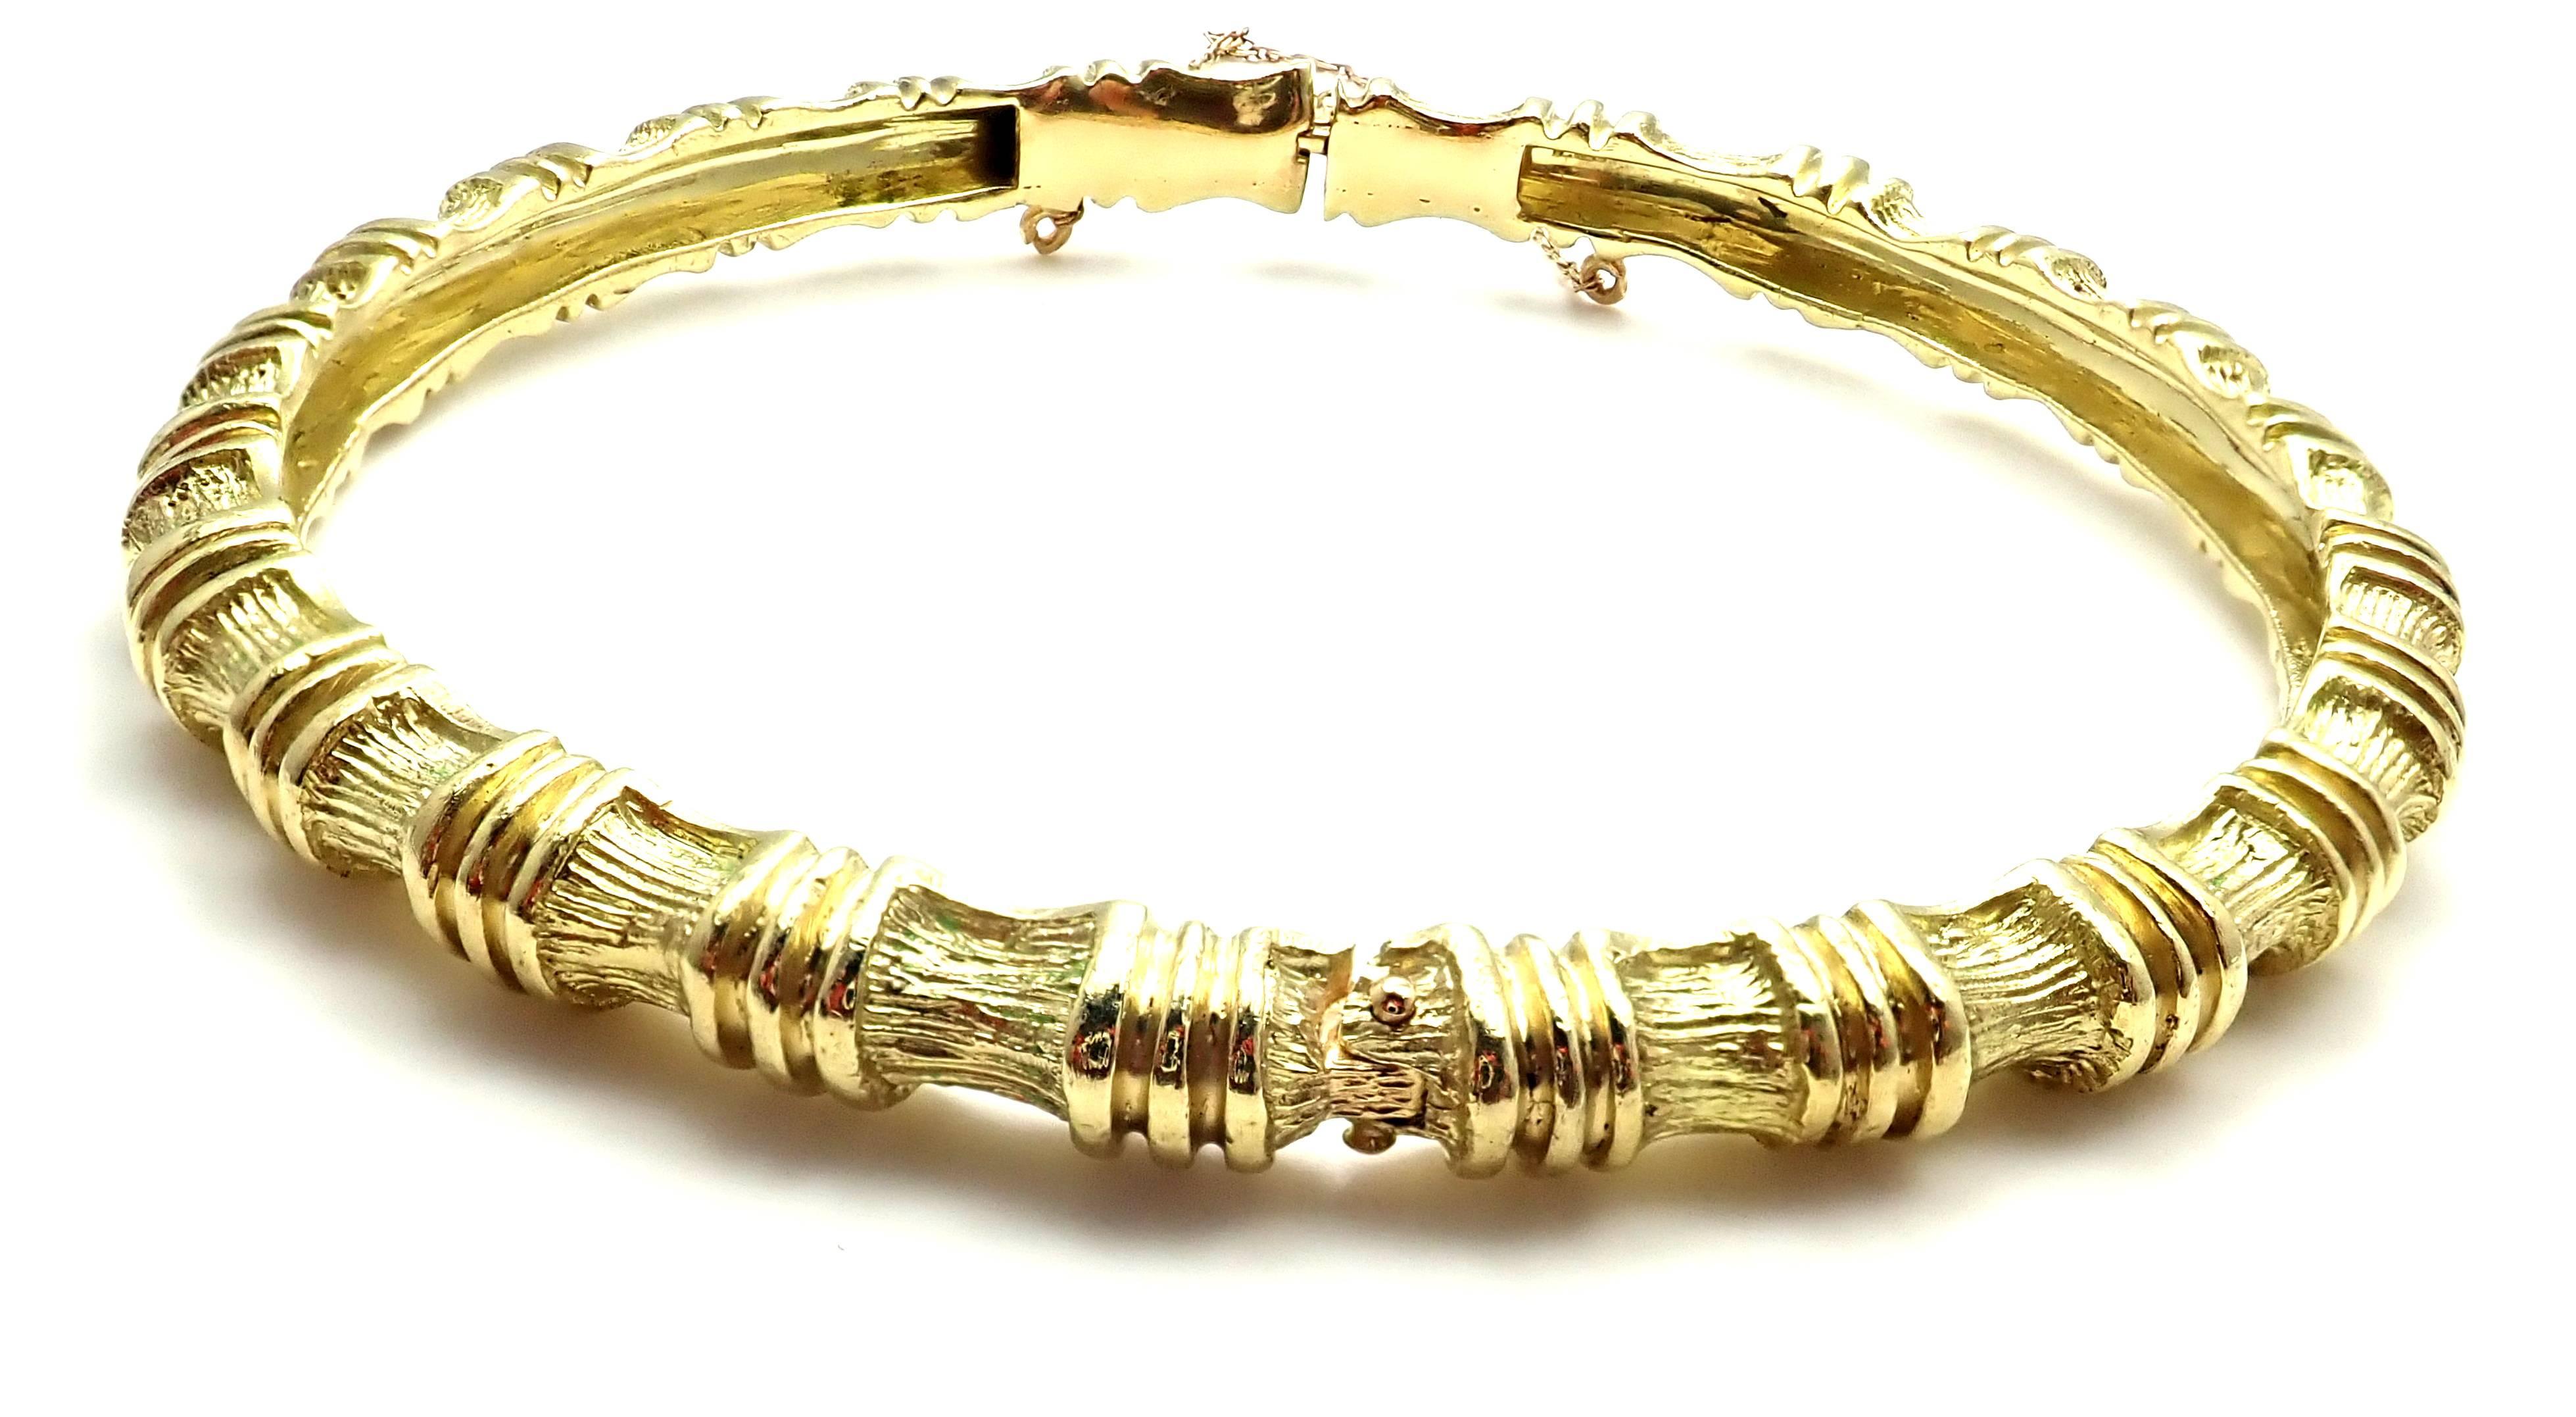 18k Yellow Gold Vintage Bamboo Bangle Bracelet by Tiffany & Co.   
Details:  
Length 7.5